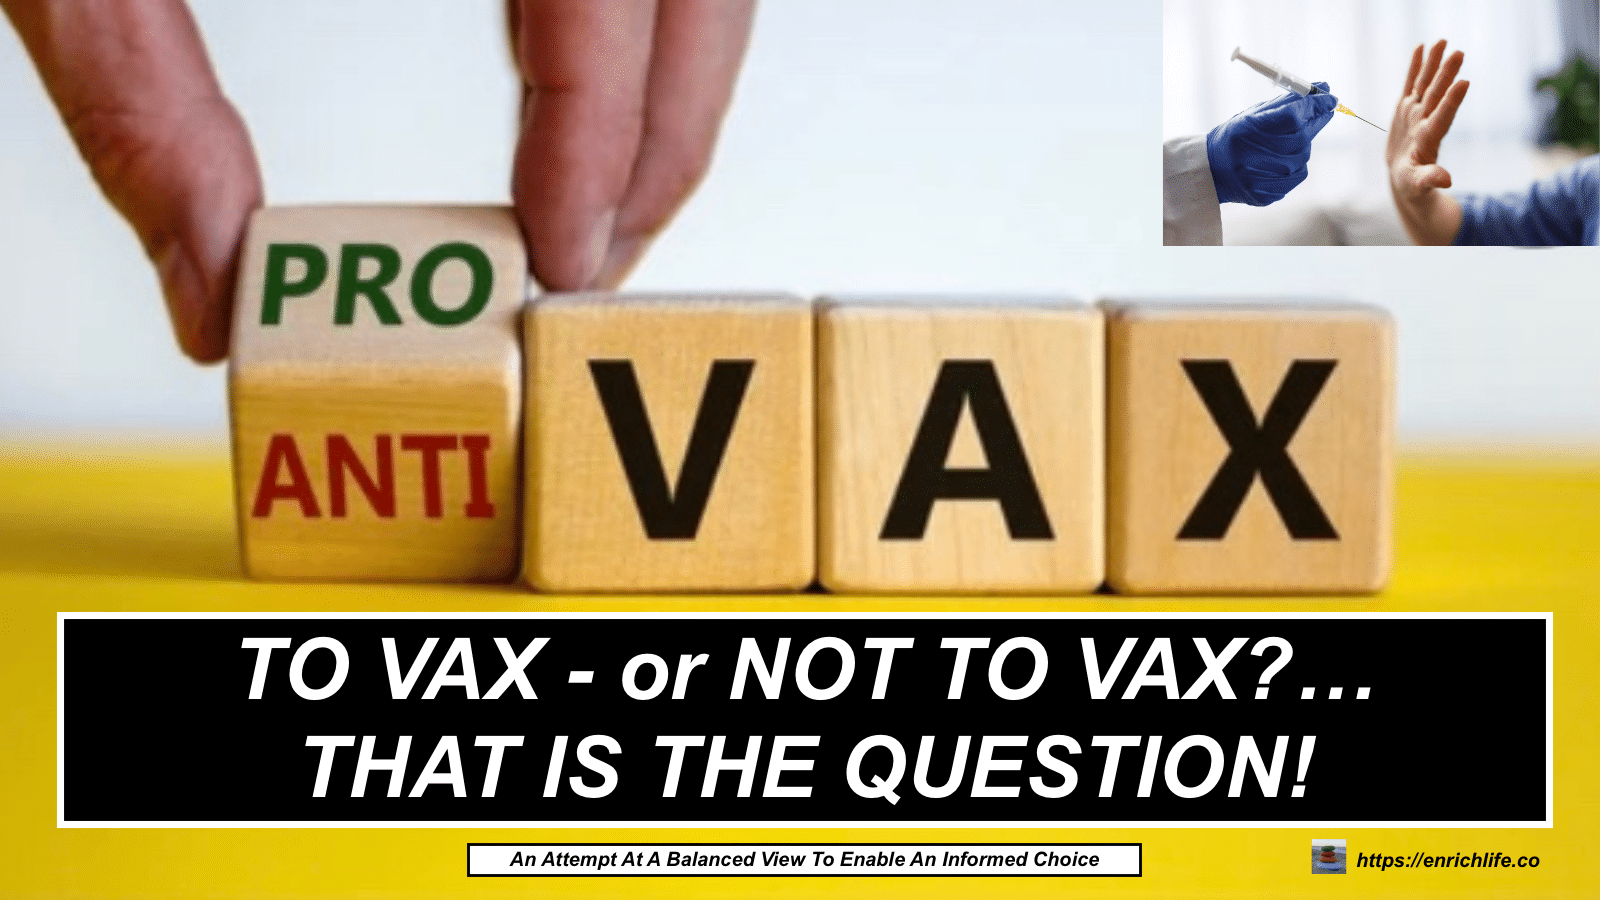 TO VAX OR NOT TO VAX – THAT IS THE QUESTION! – A highly researched attempt to enable a balanced view